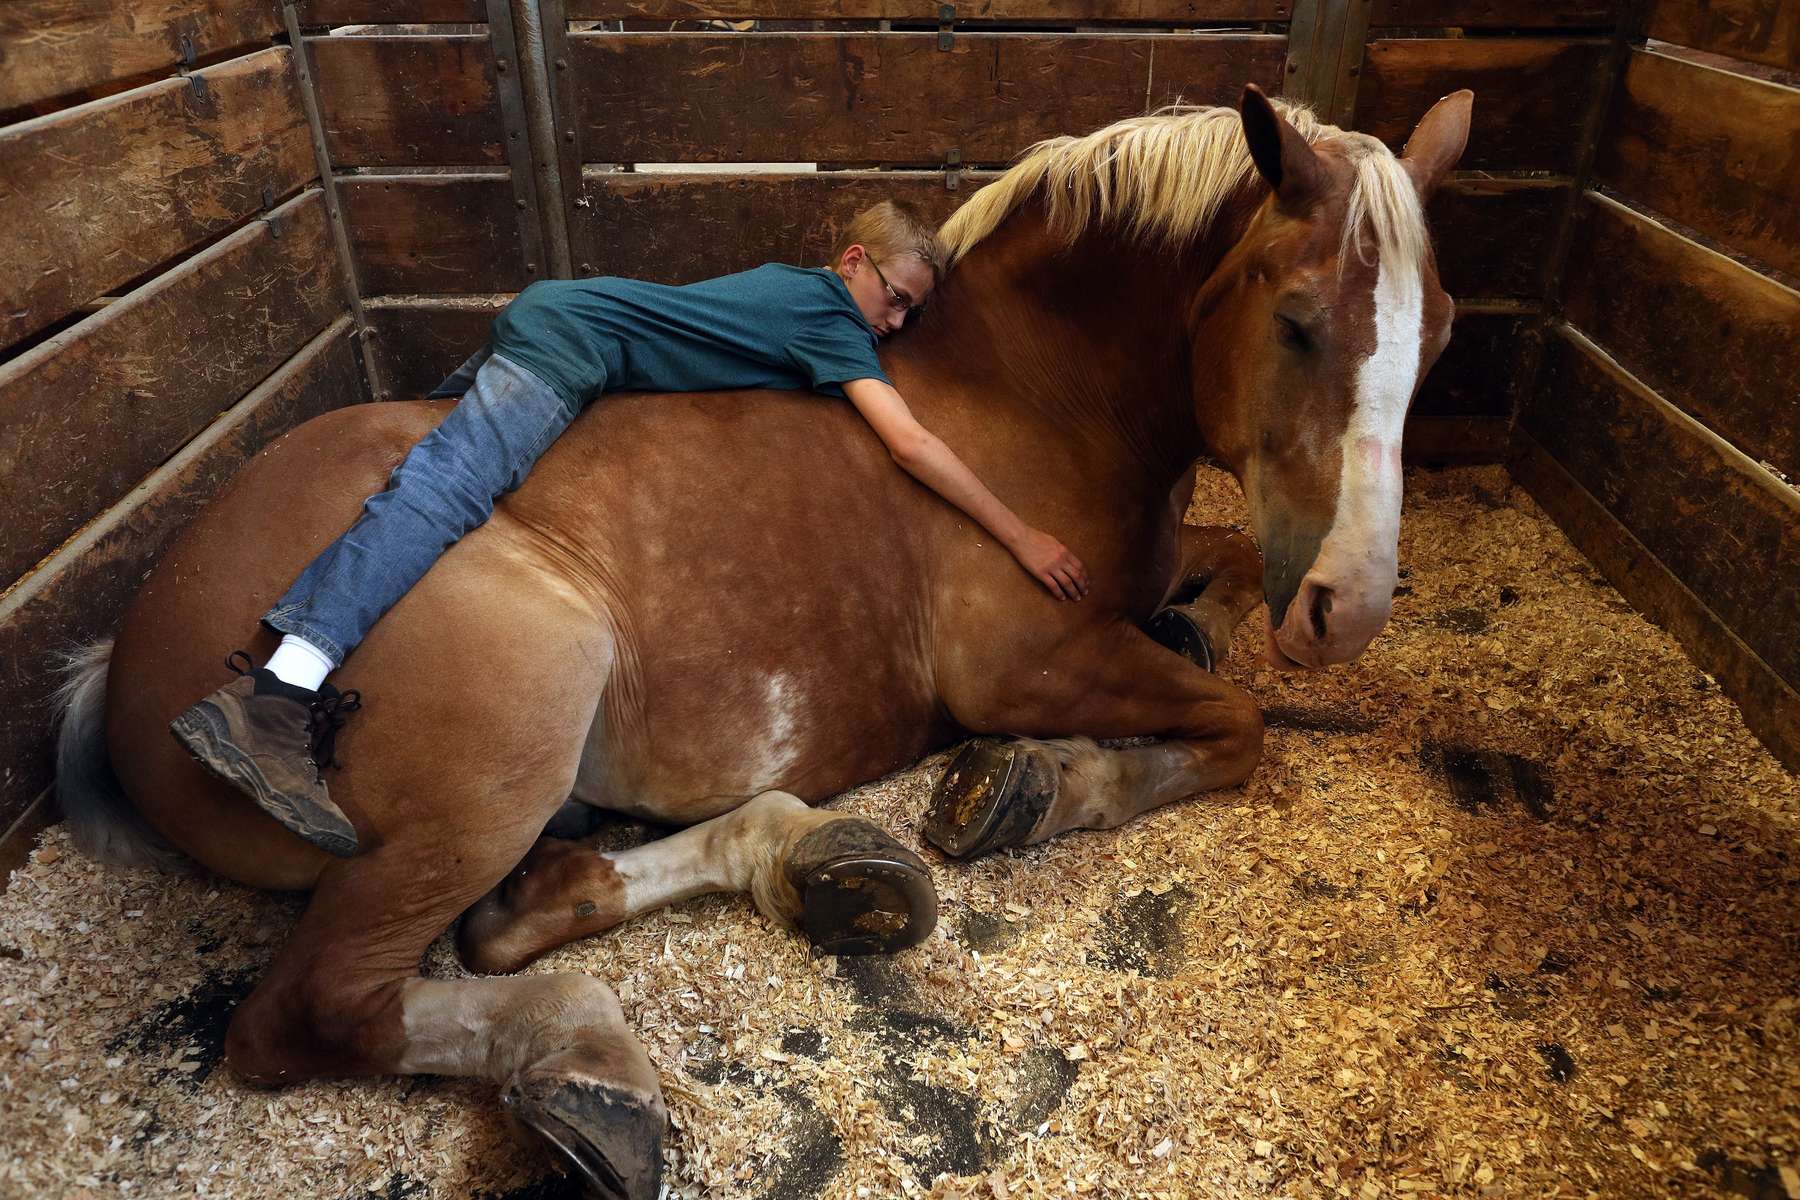 Ty Meyer, 12, laid atop his horse, Jake, a 12-year-old Belgian draft, as he slept in his stall in the horse barn during opening day at the Minnesota State Fair in St. Paul, Minn. 